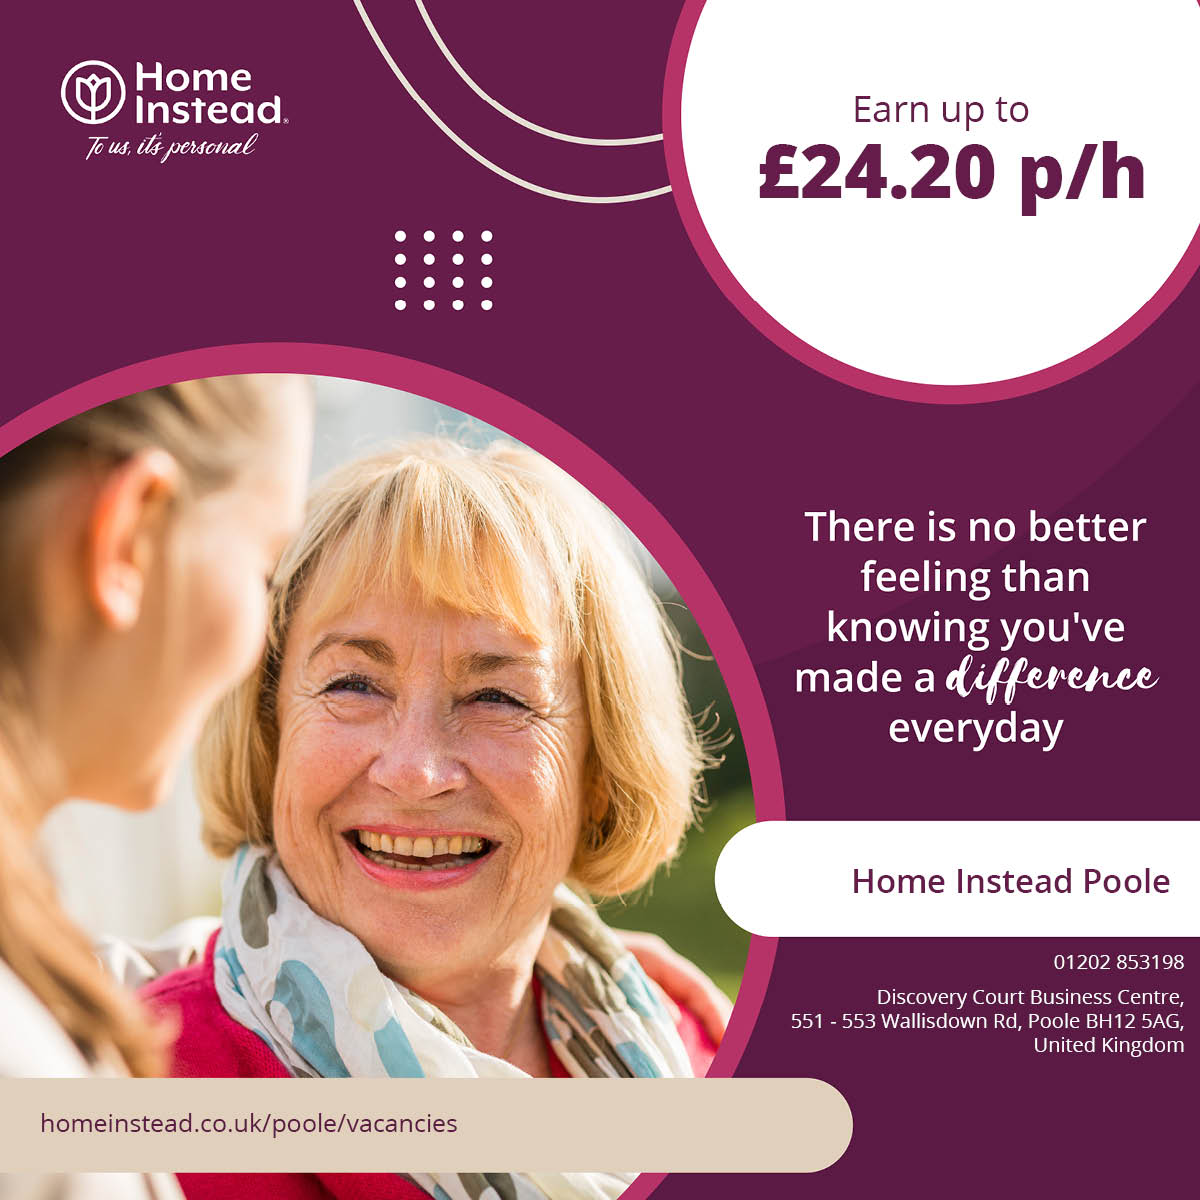 Home Instead Home Care & Live-in Care Poole